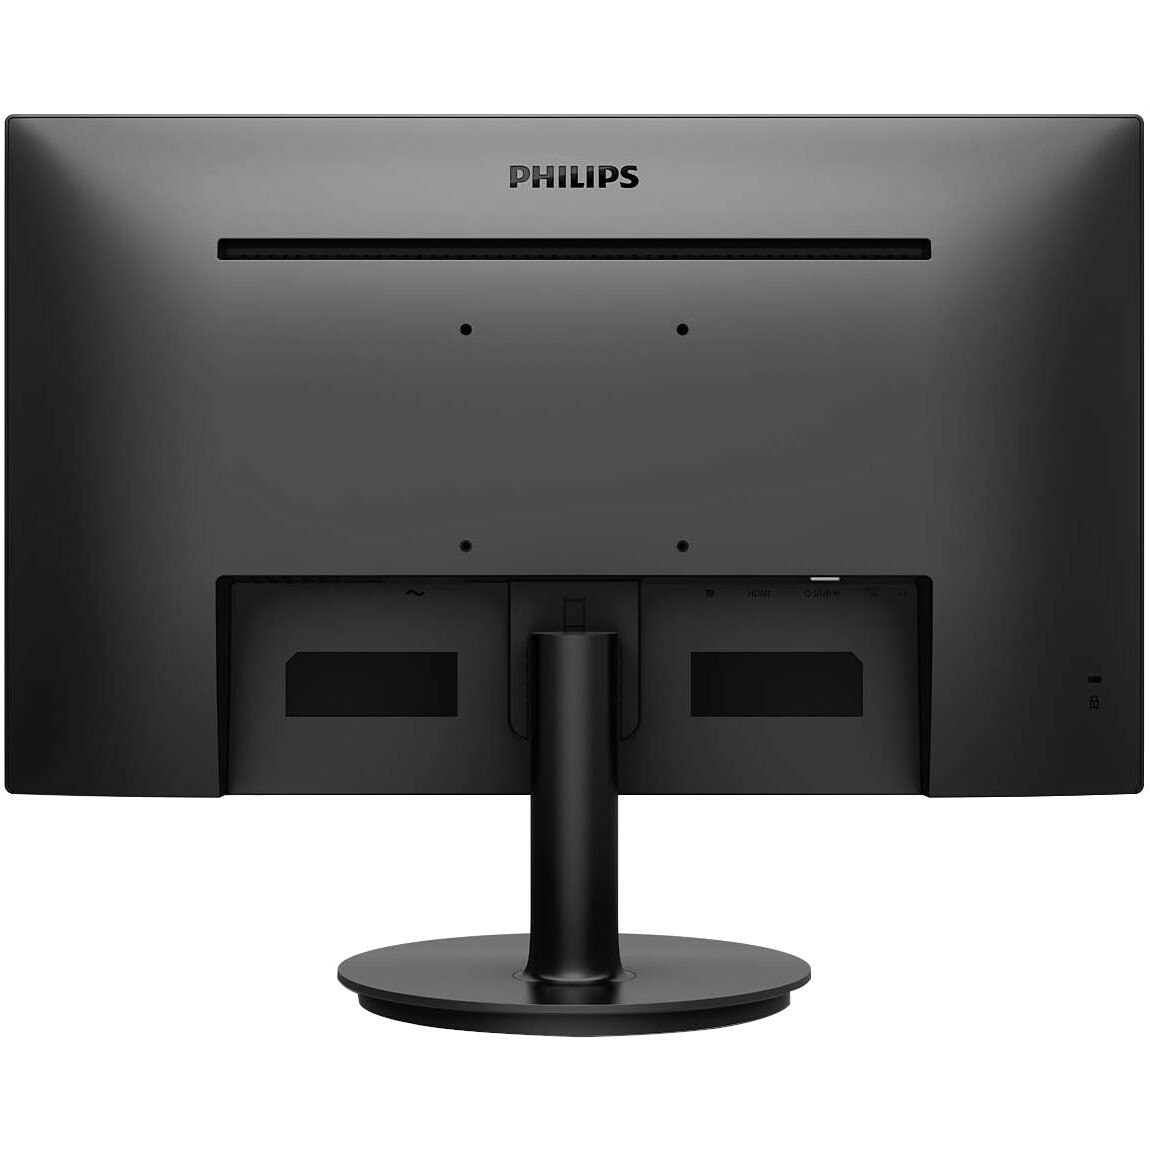 Philips 272V8A 68.6 cm (27") Full HD WLED LCD Monitor - 16:9 - Textured Black